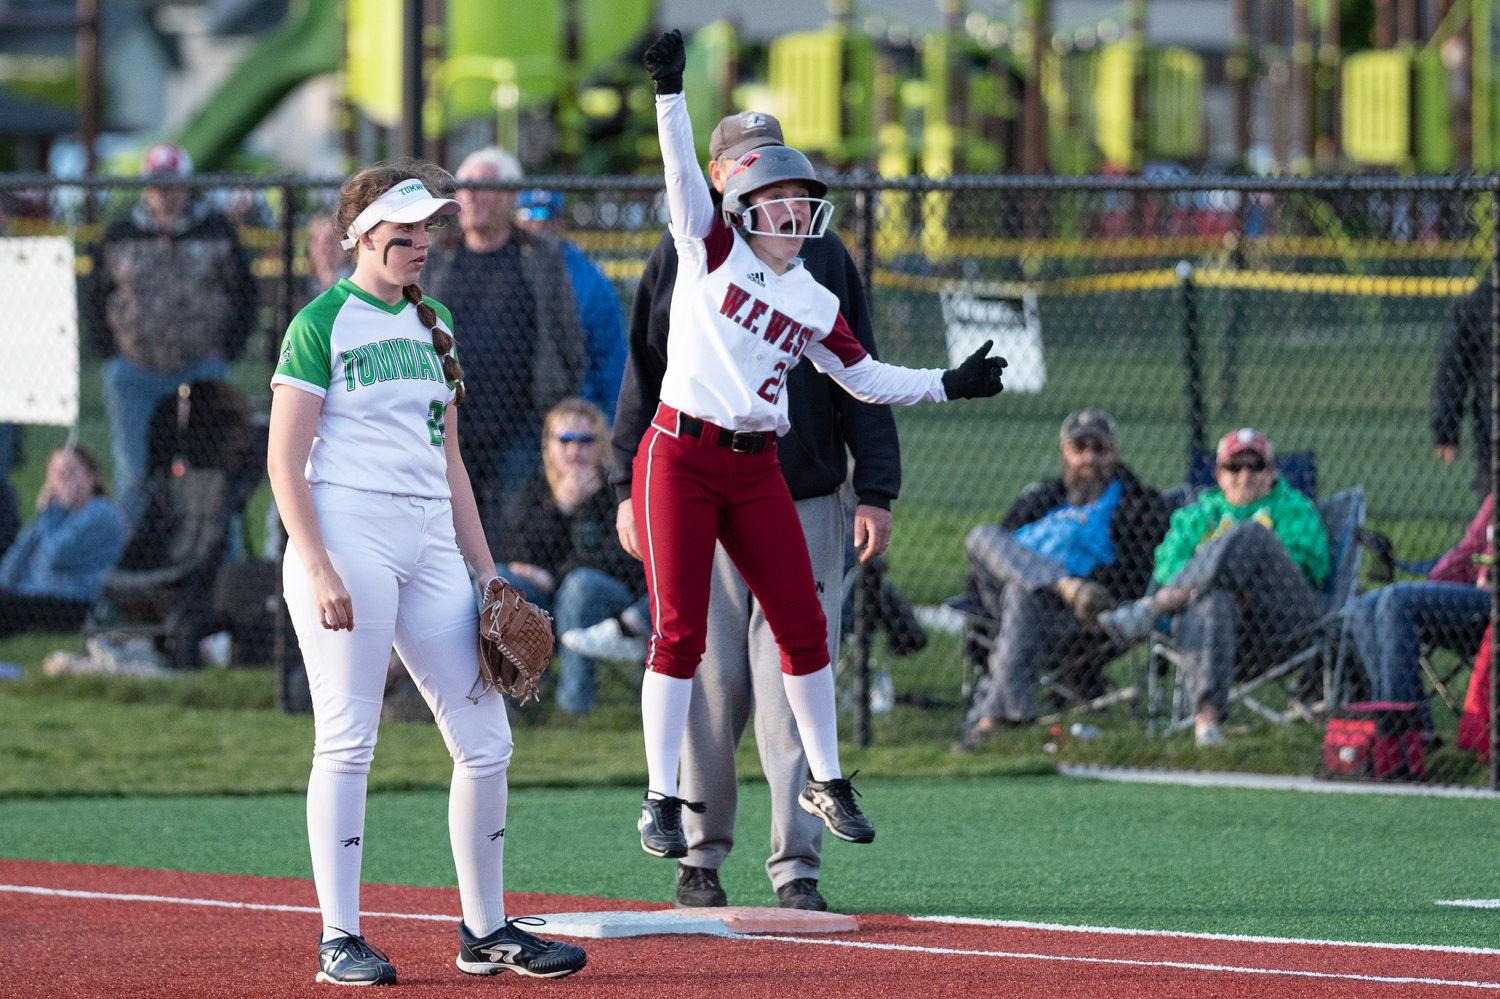 W.F. West shortstop Avalon Myers fist pumps after hitting the go-ahead RBIs against Tumwater in the 2A District 4 championship game at Rec Park May 20.